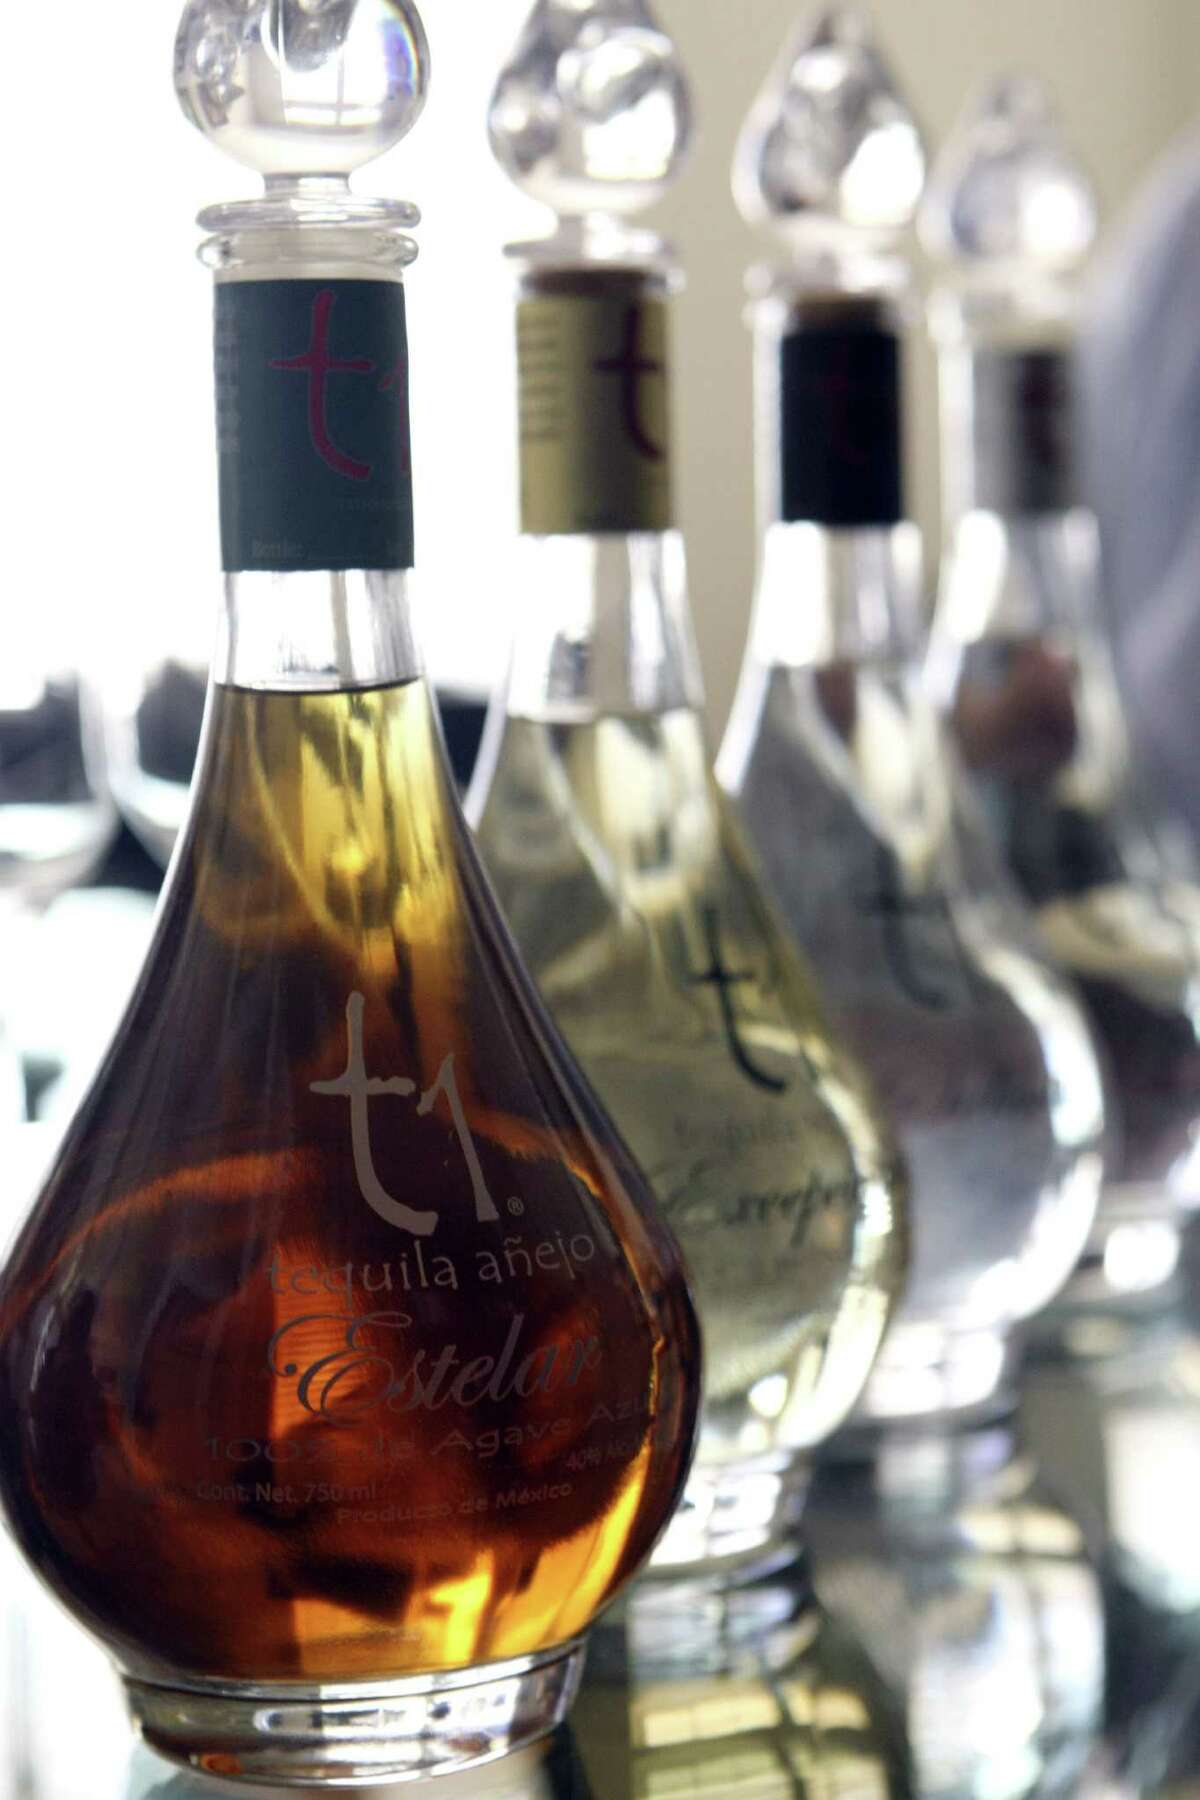 T1 tequila uno is the U.S. counterpart to Chinaco tequila, which was founded by González's father.